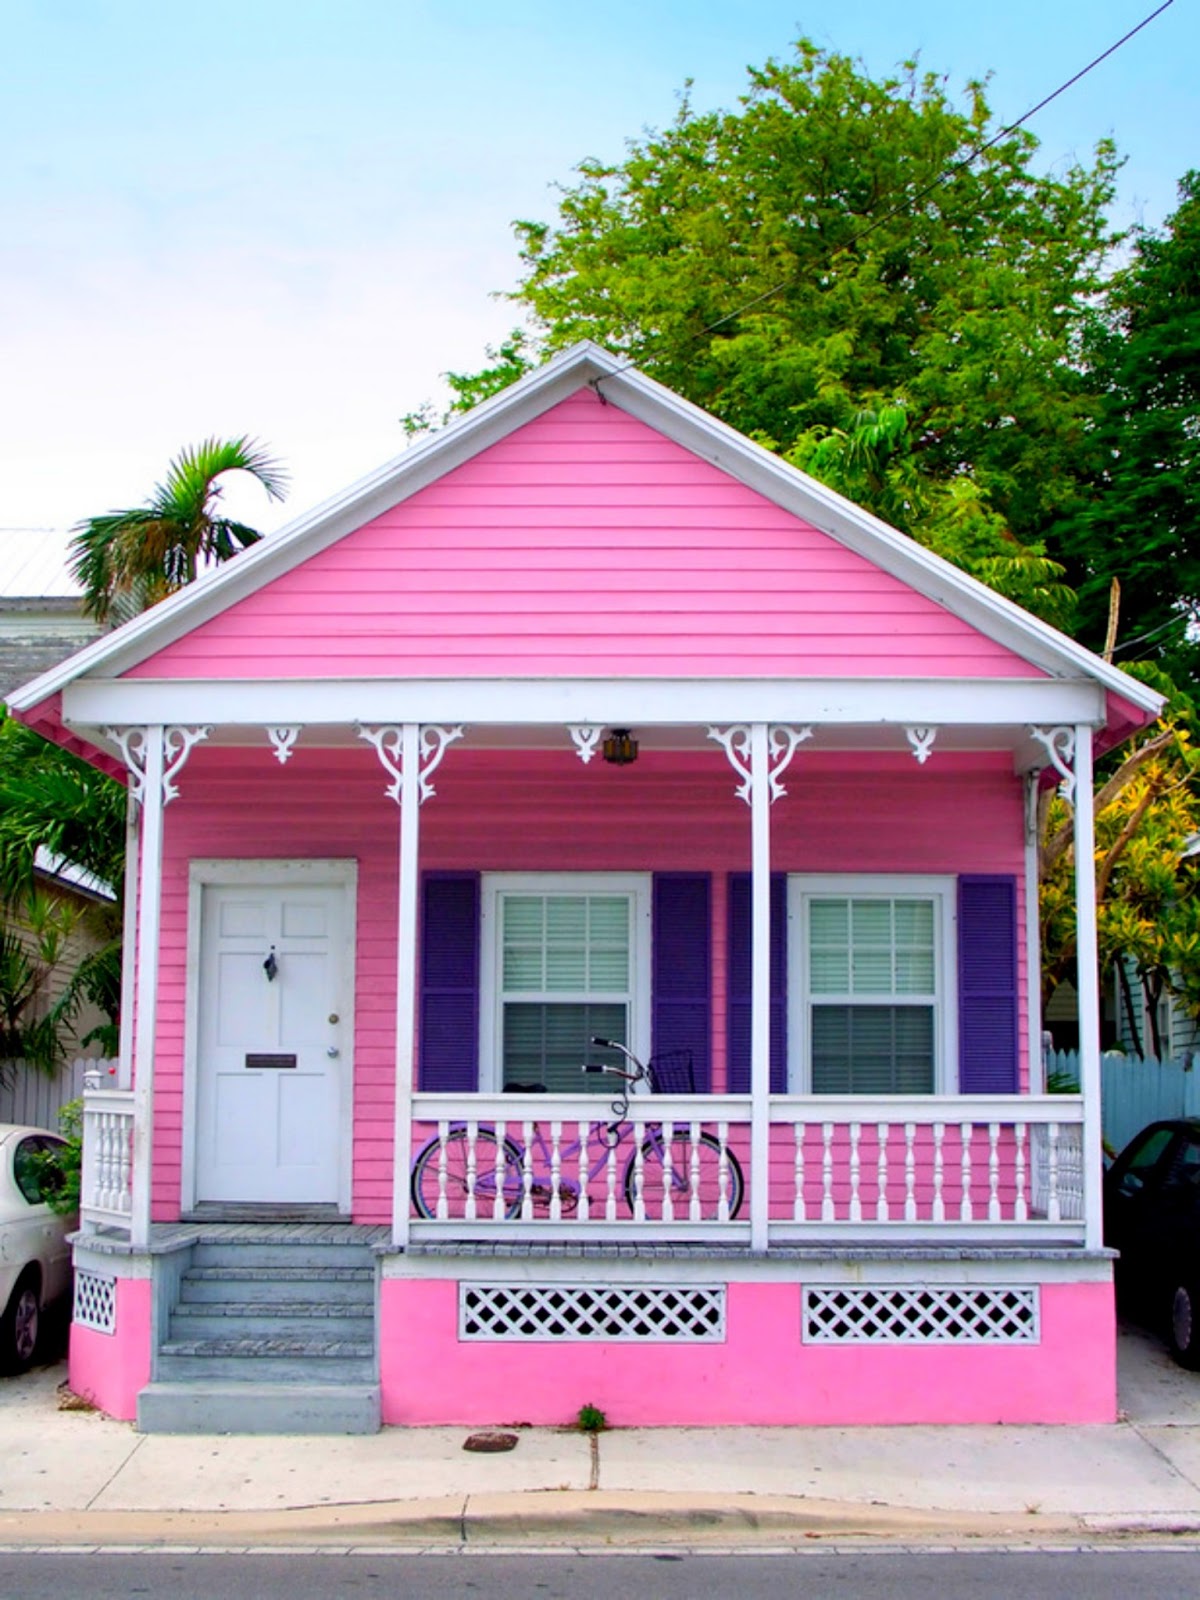 TVI WITH PETER JARRETTE HOT PINK TROPICAL HOMES HOUSES 